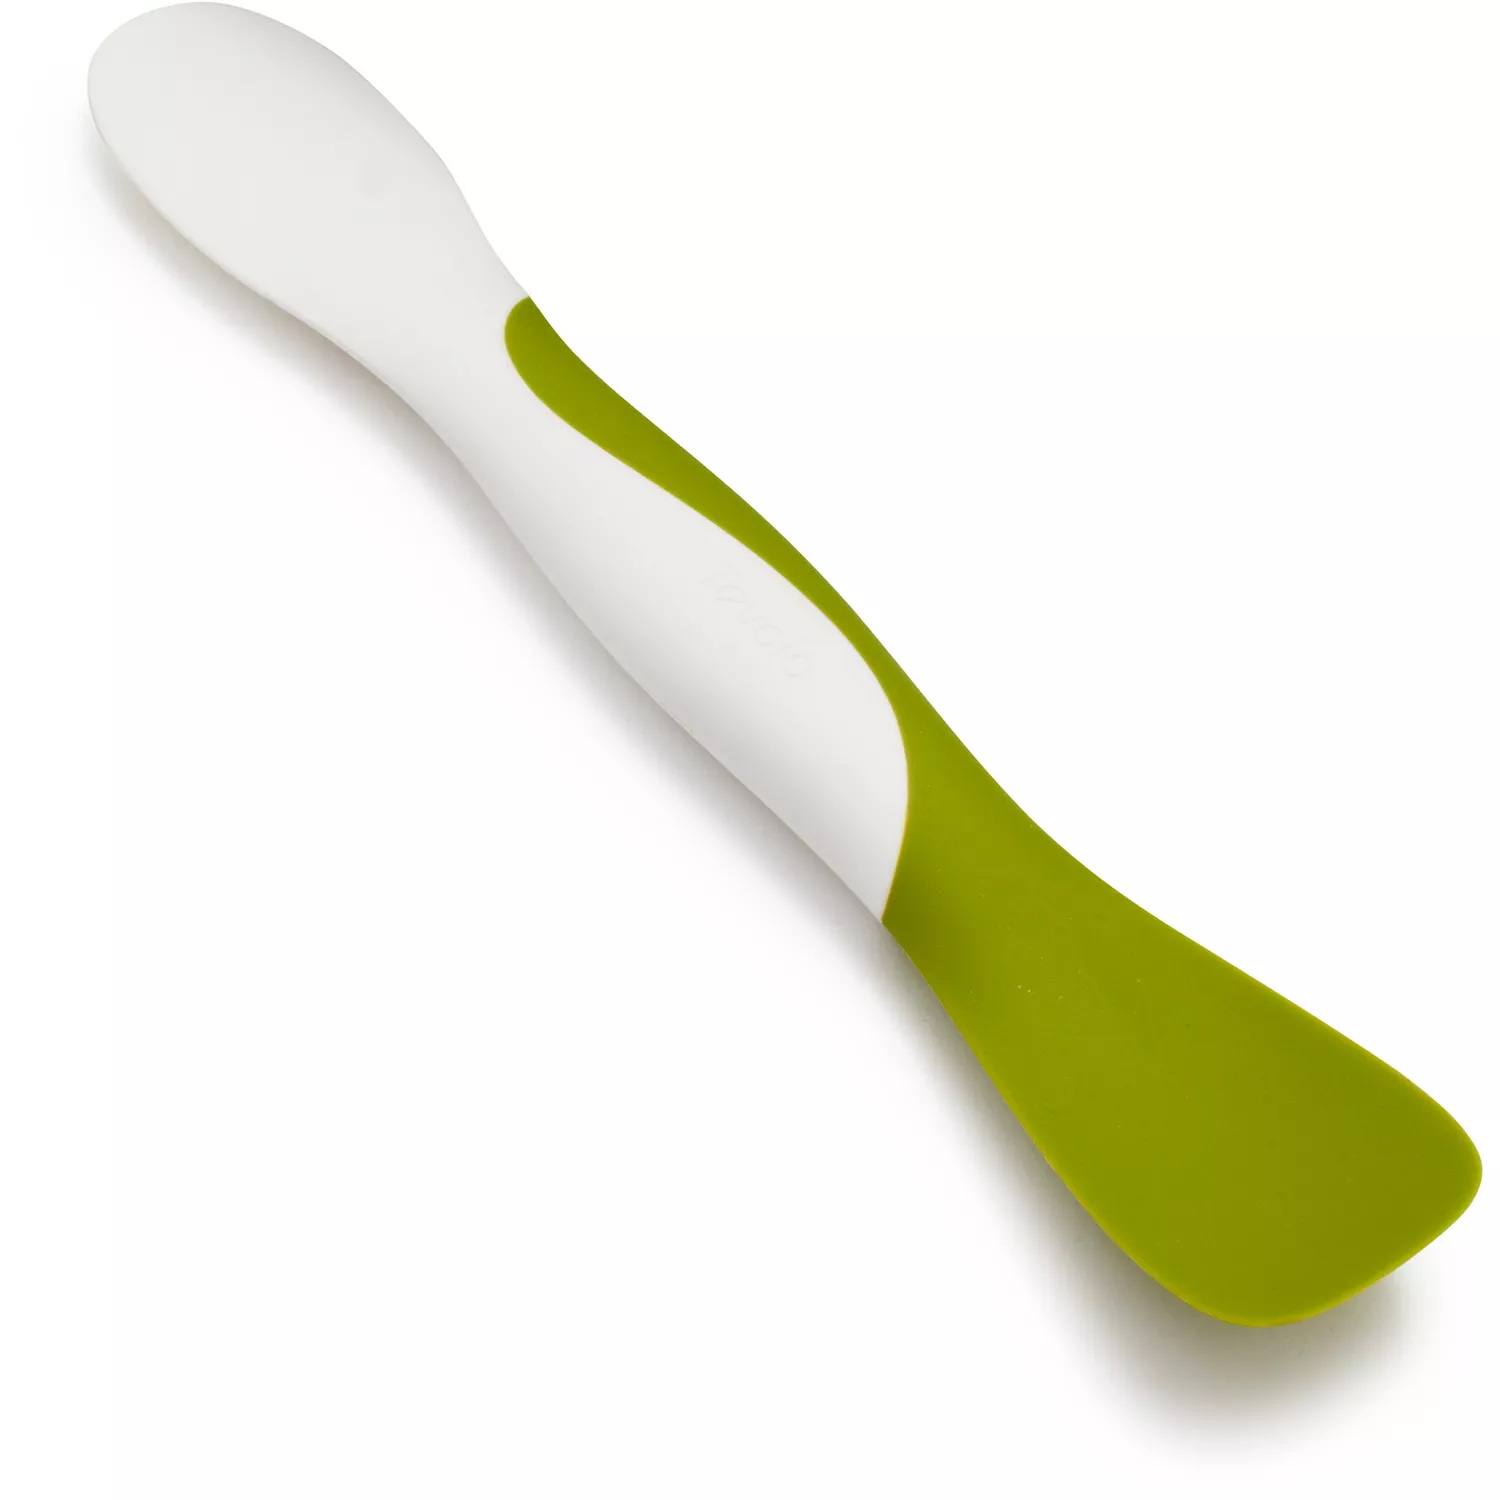 Tovolo Elements All Silicone Spatula for Scraping, Spreading Food, Mixing,  Prep Processing and More Blueberry